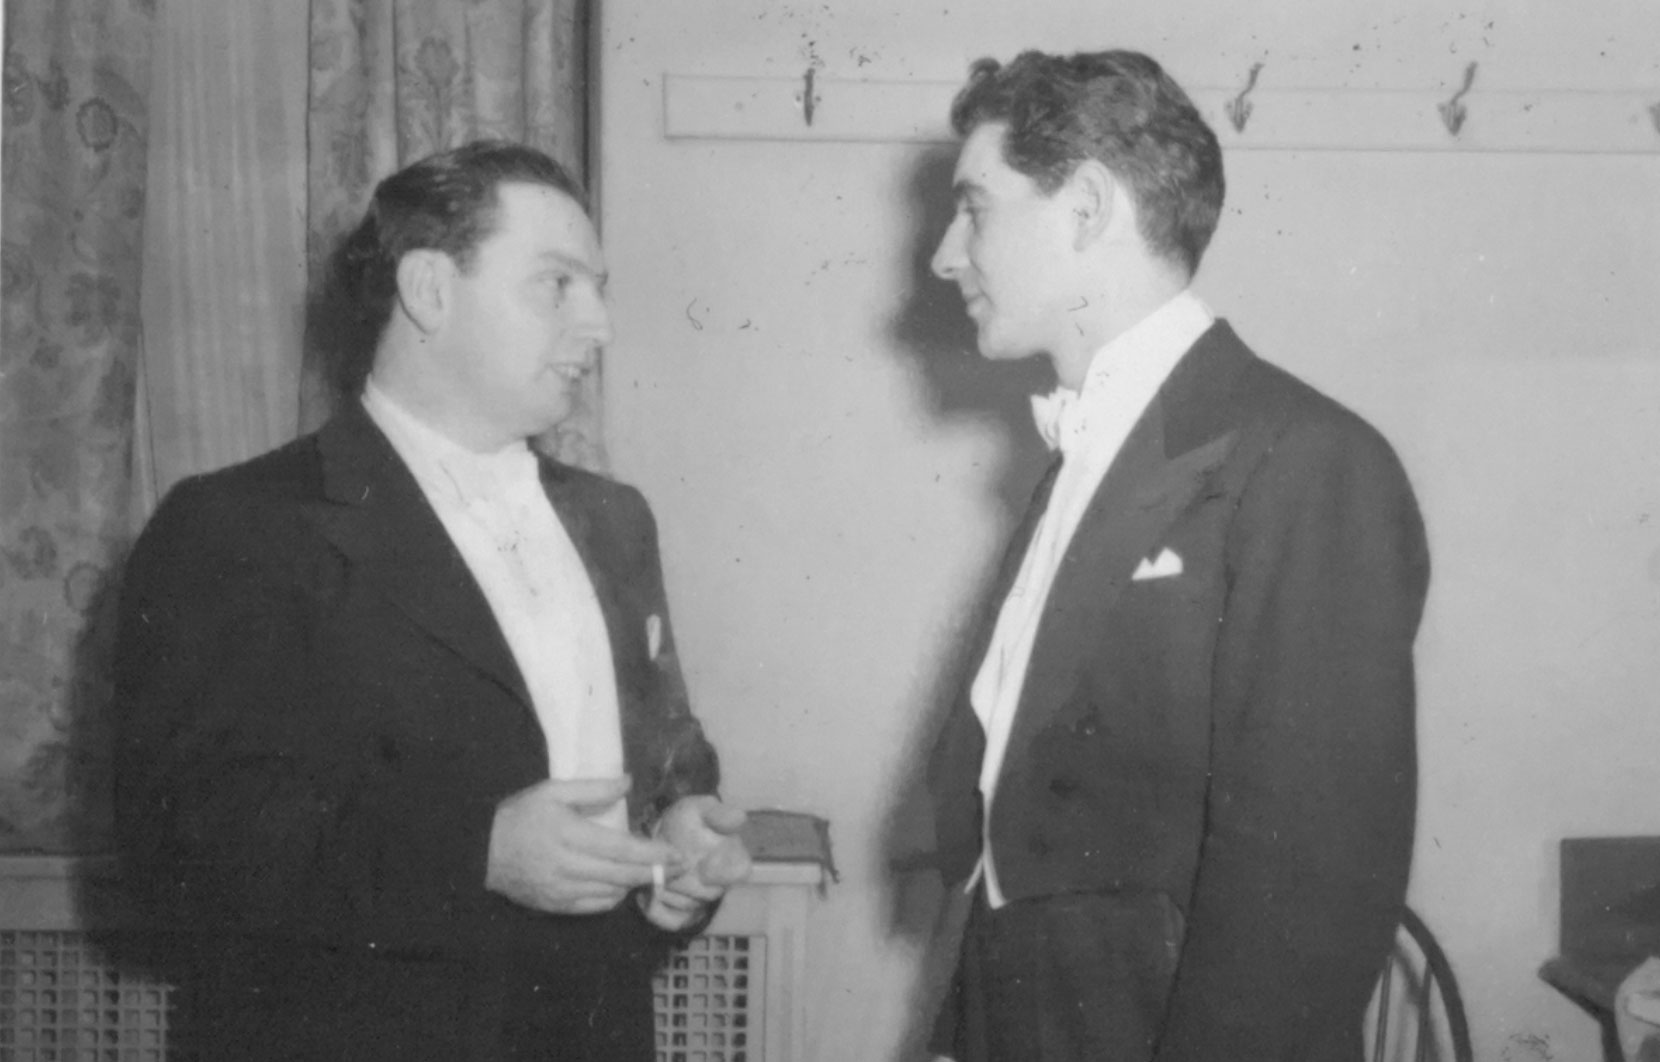 Leonard Bernstein with Isaac Stern after Rochester Philharmonic concert, February 27, 1947. (Credit: Library of Congress Music Division)